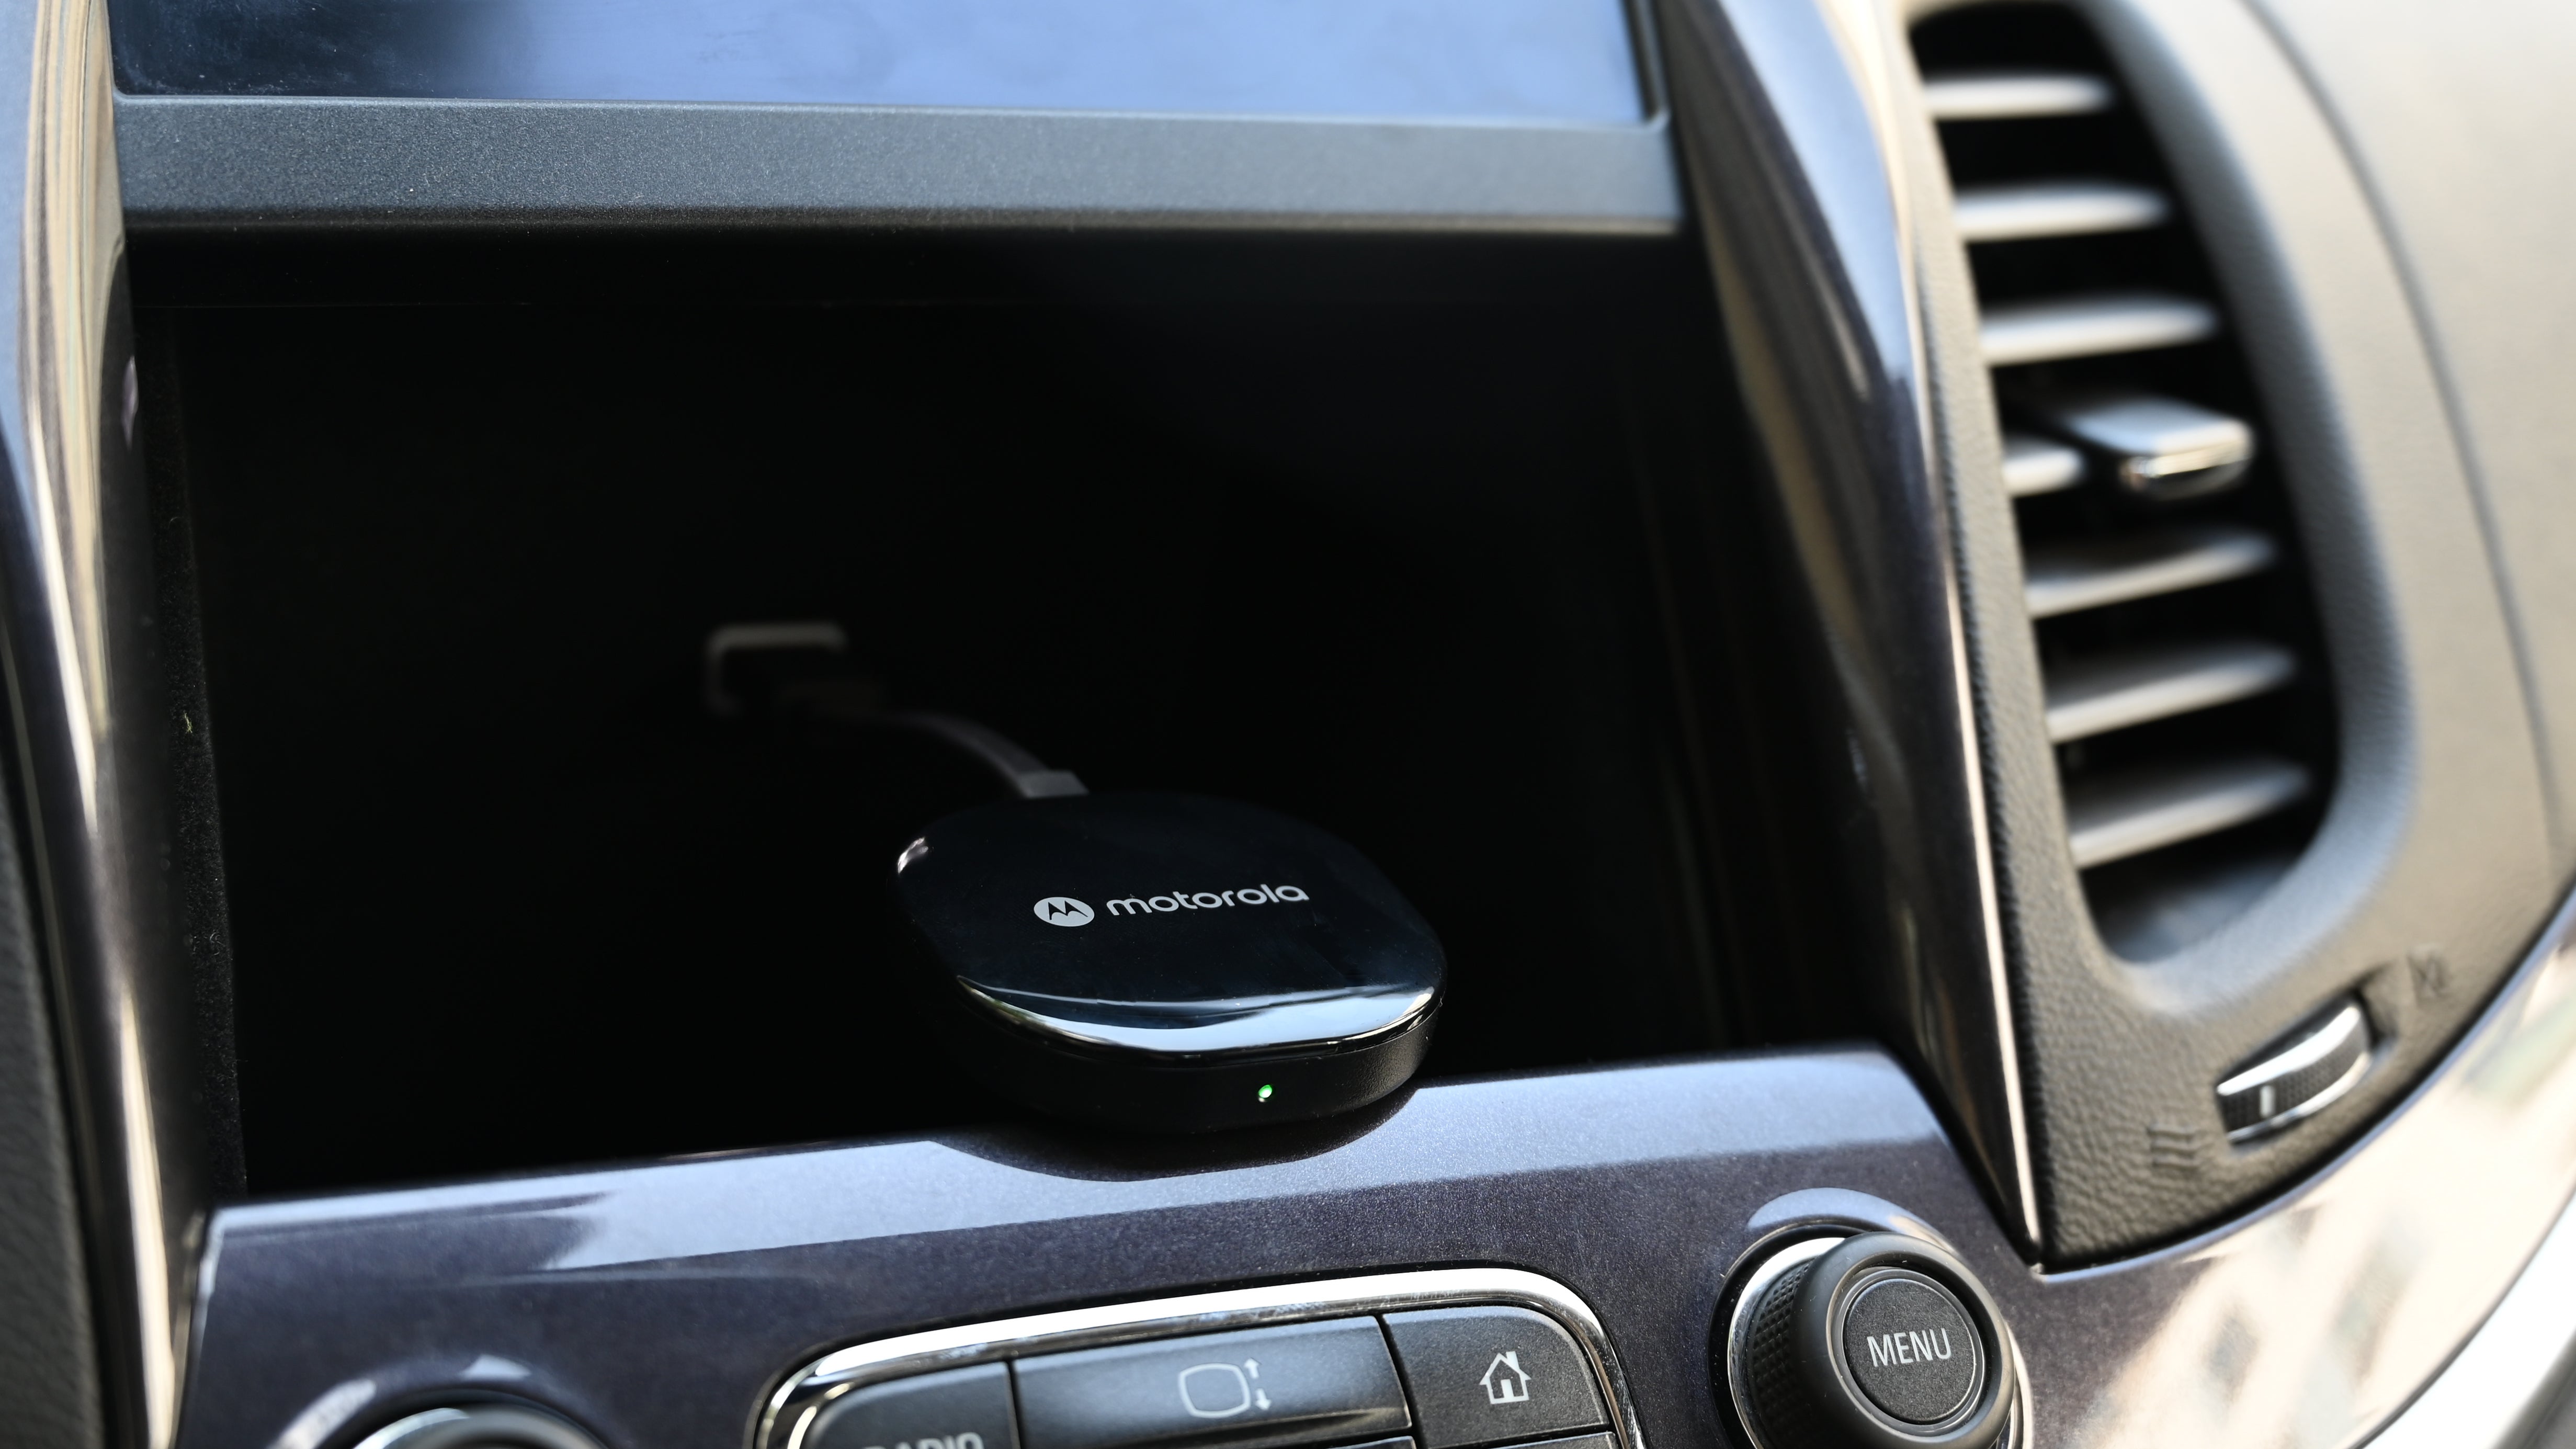 The MA1 worked when connected to this USB located in a Chevy Impala's hidden storage compartment.  (Photo: Phillip Tracy/Gizmodo)